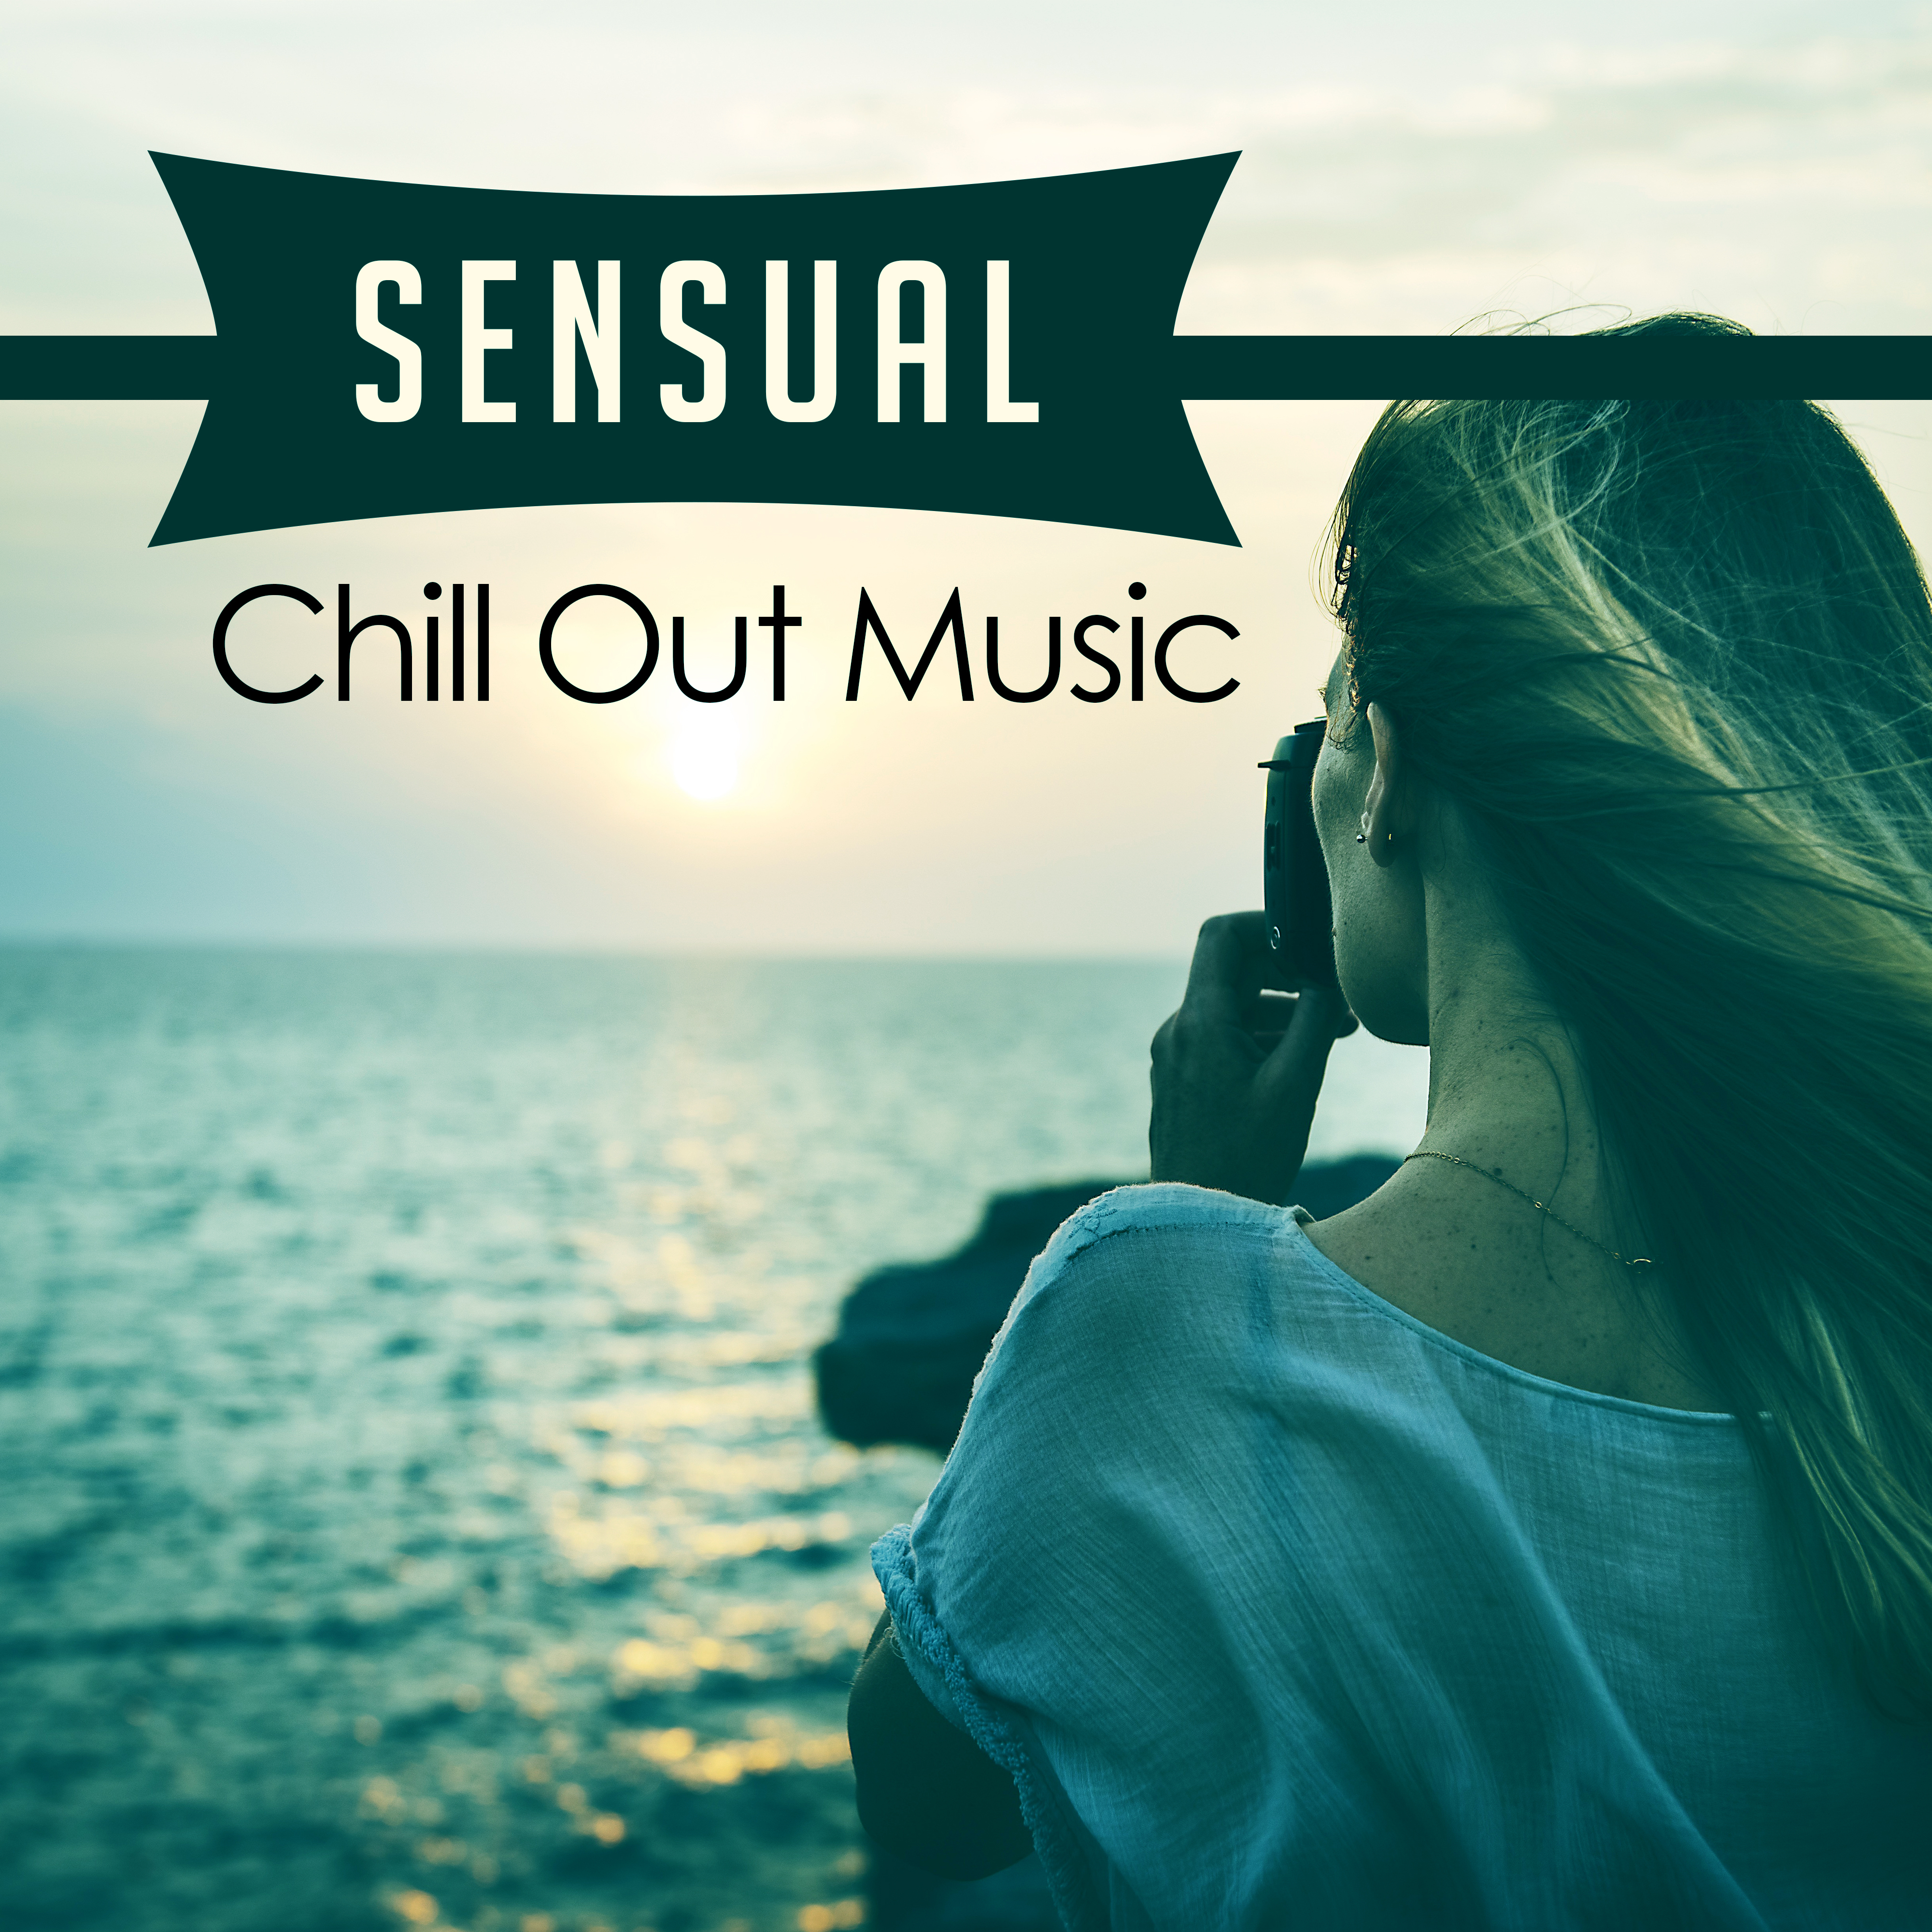 Sensual Chill Out Music  Relaxing Ibiza Sounds, Sexy Moves, Erotic Vibes